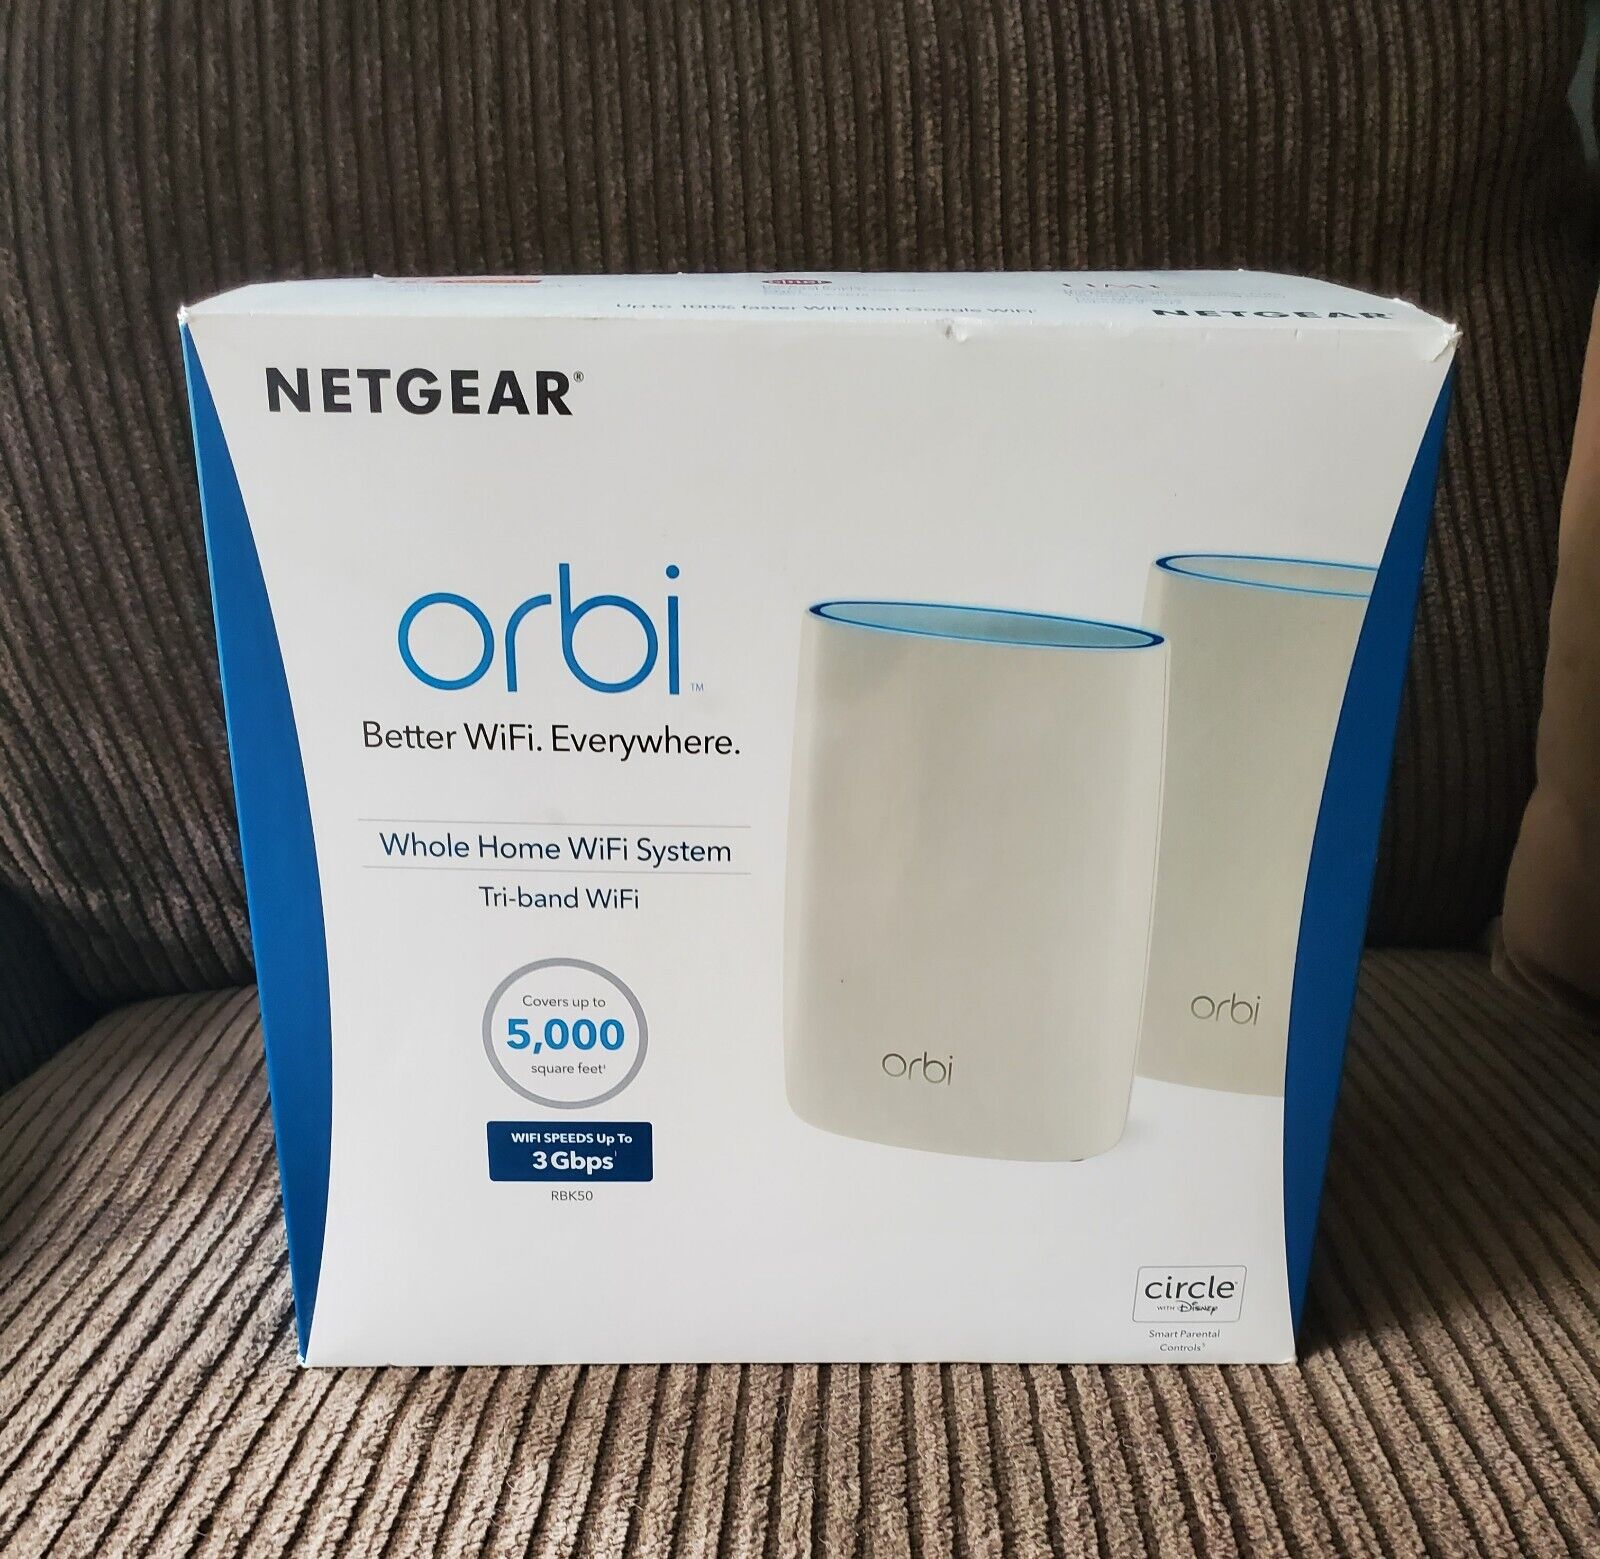 NEW Netgear Orbi AC3000 TriBand Whole Home Mesh WiFi Router System RBK50-100NAS